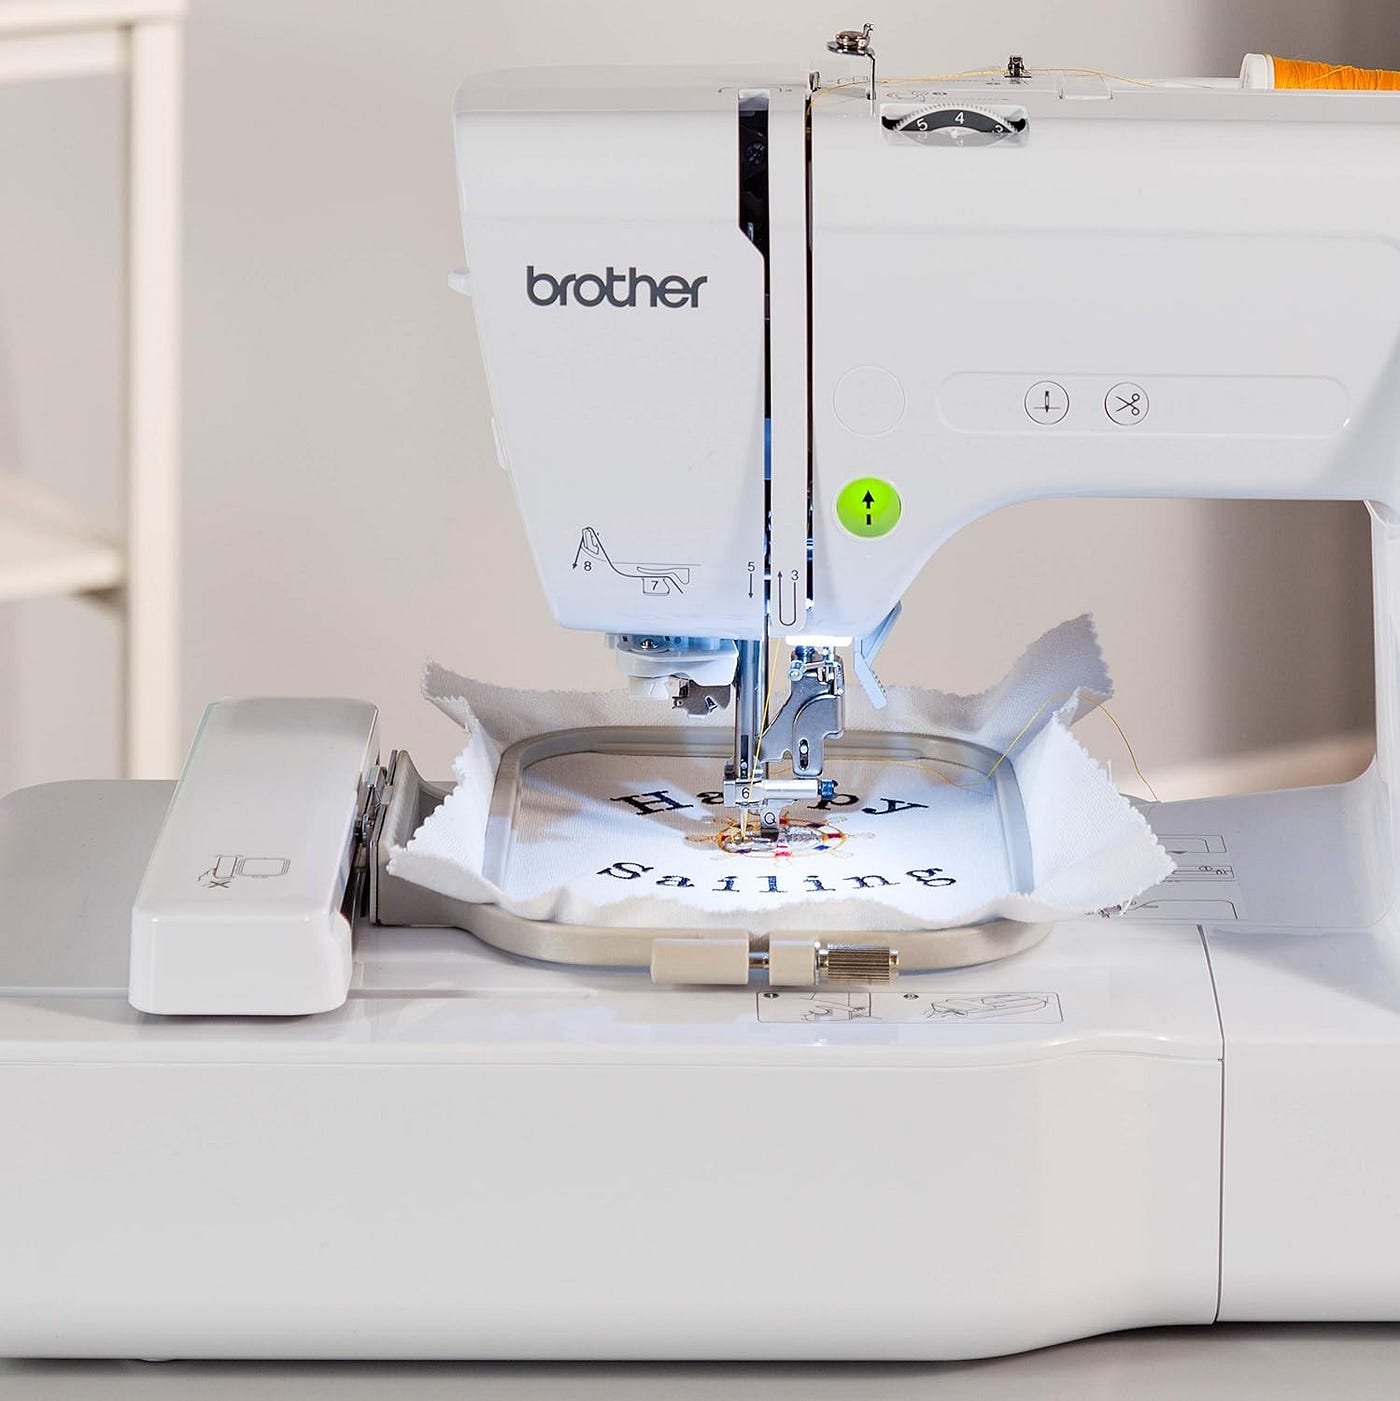 Brother PE 535 embroidery machine, let's take a tour! 